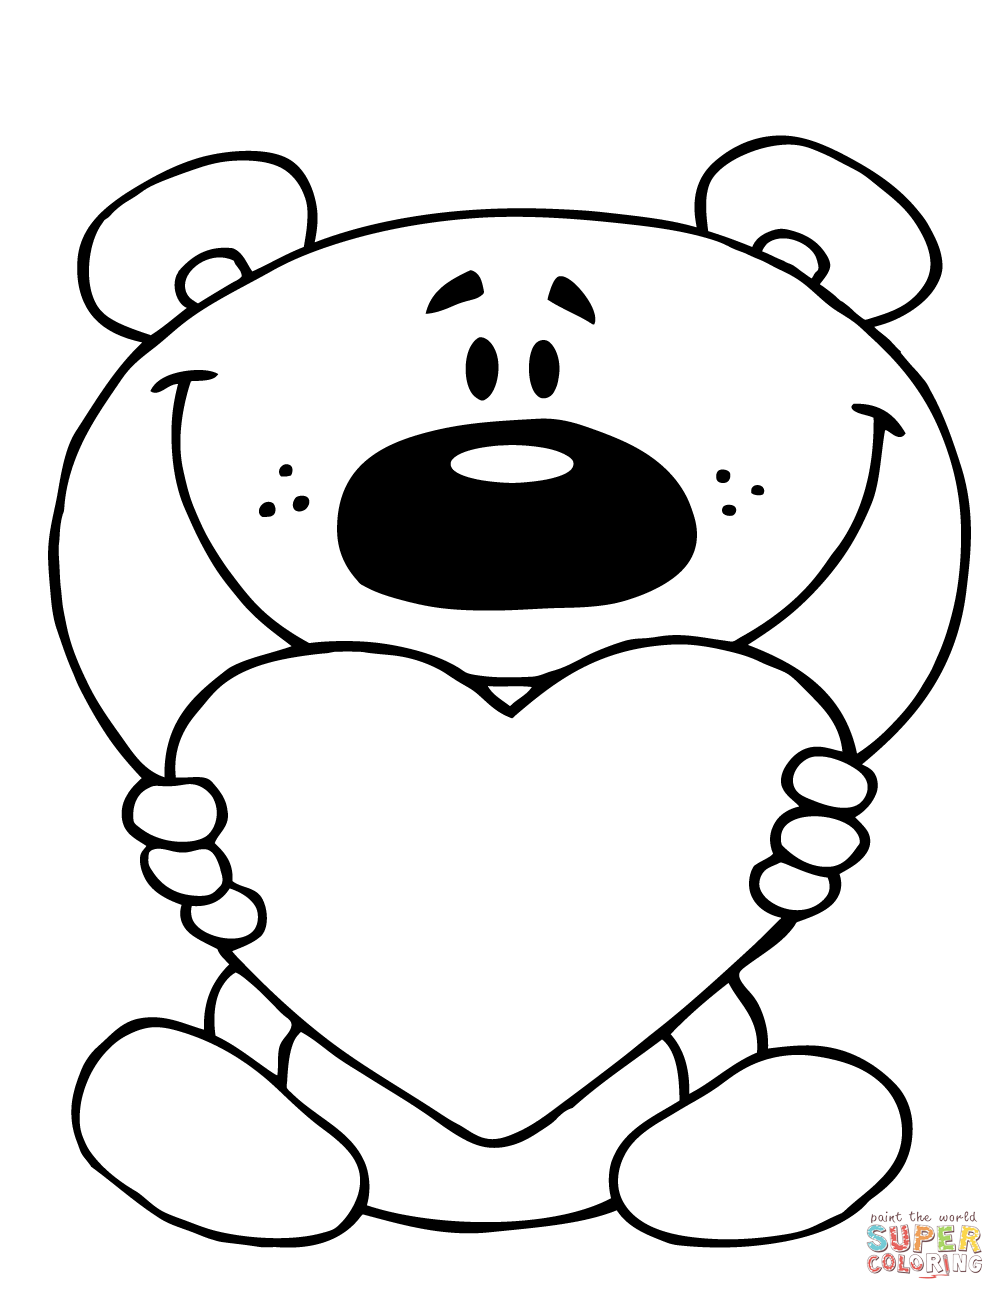 Teddy bear holding a red heart coloring page free printable coloring pages